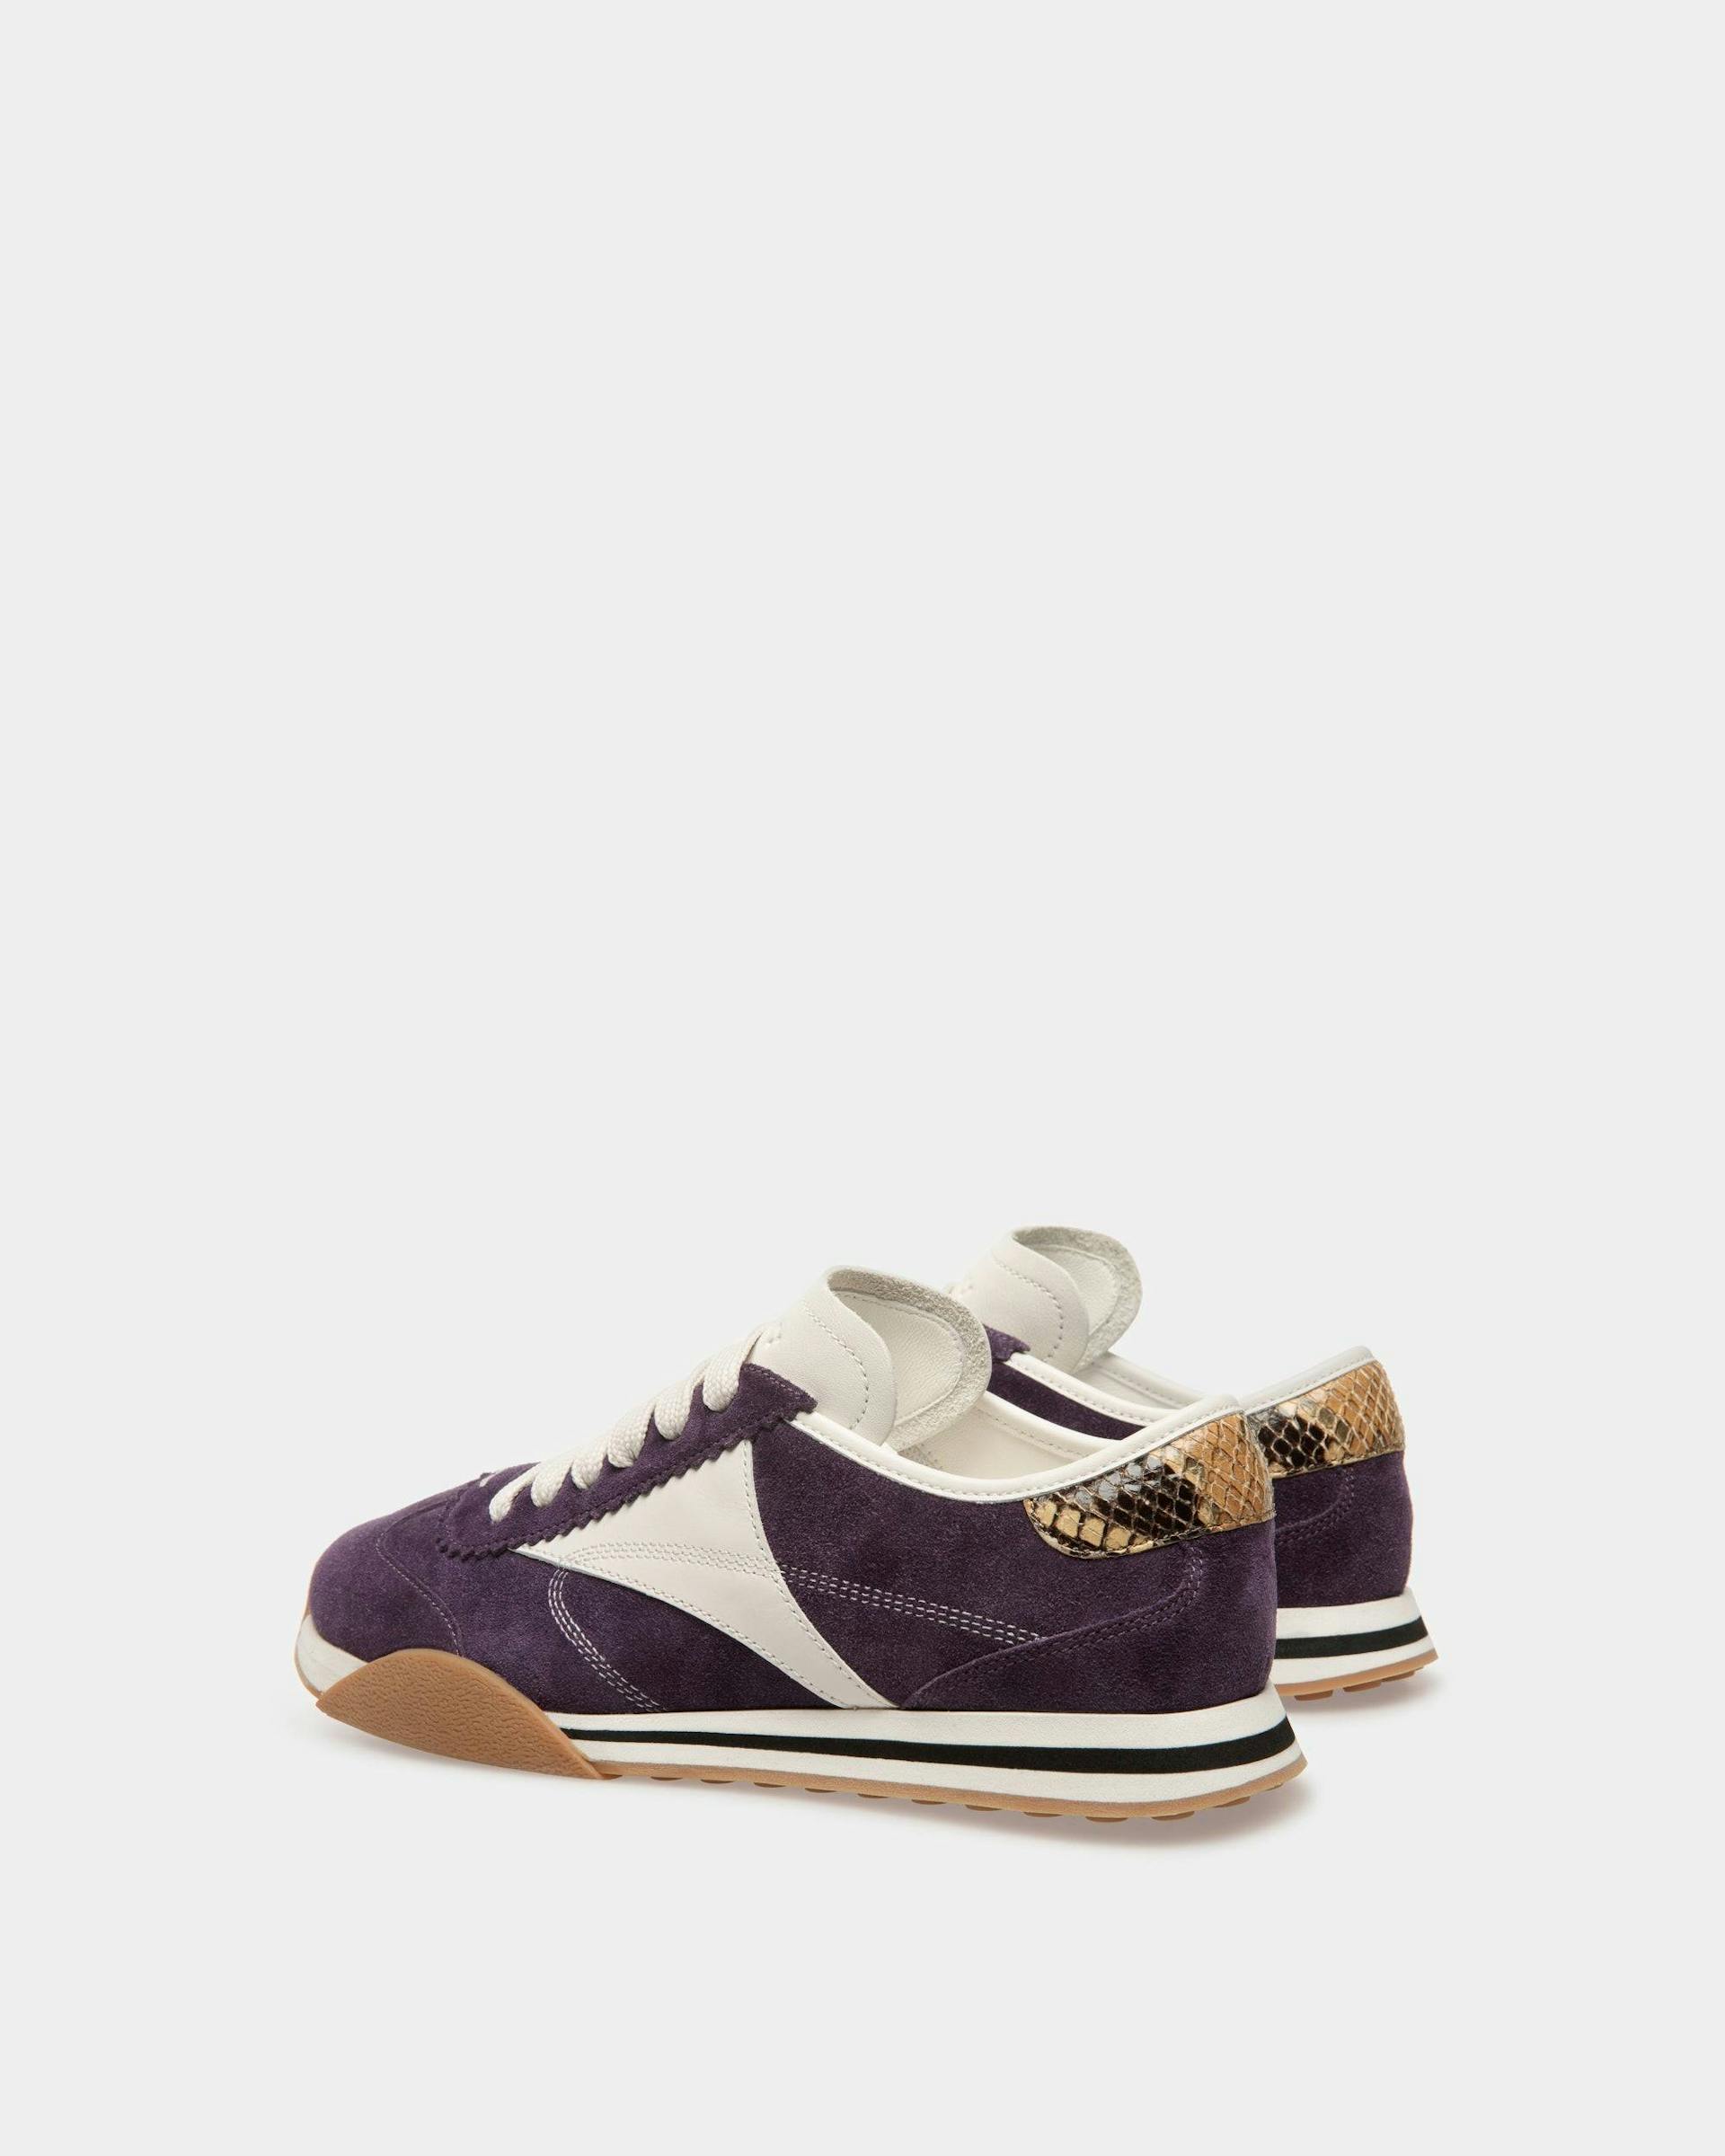 Sussex Sneakers In Orchid And White Leather - Women's - Bally - 04